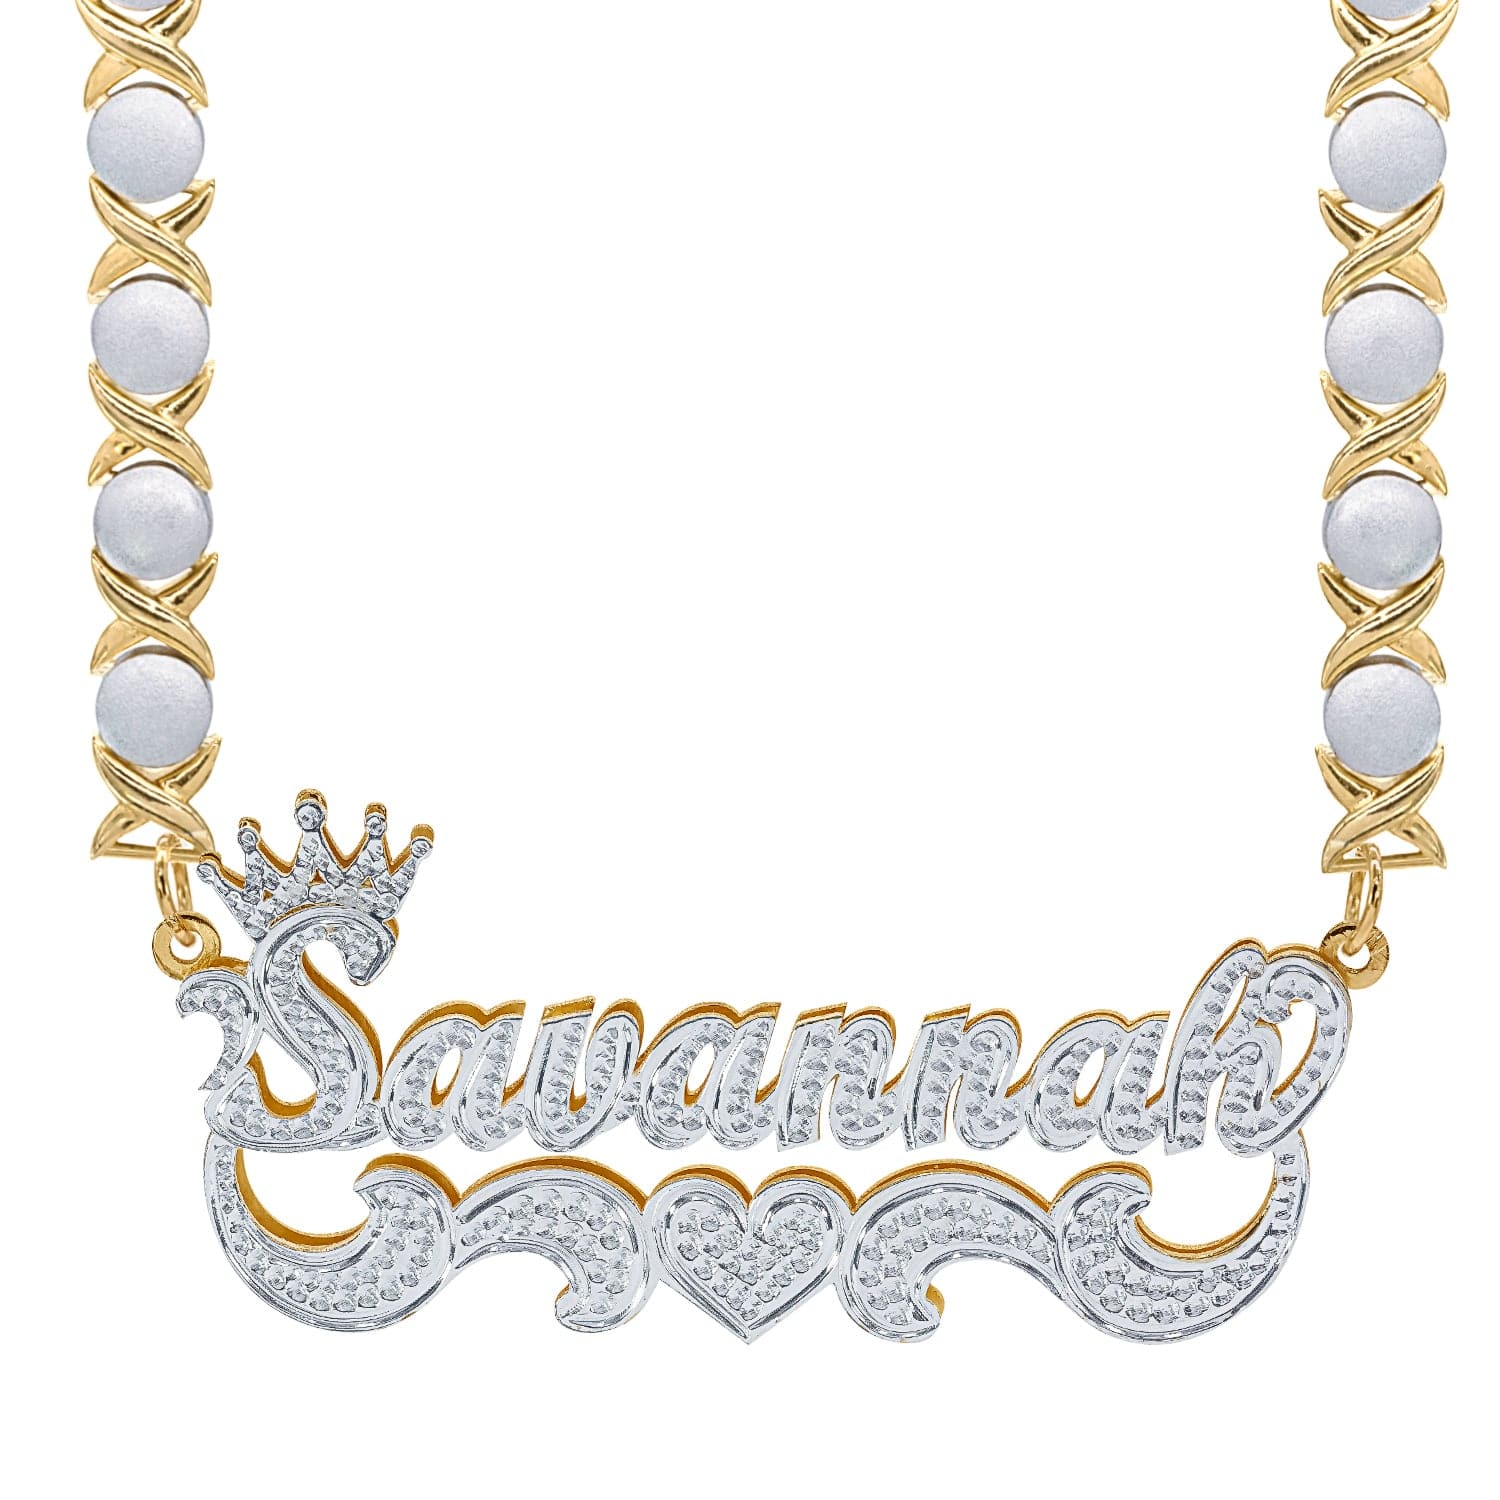 14k Gold over Sterling Silver / Rhodium Xoxo Chain Crown Double Plated Name Necklace "Savannah" with Rhodium Xoxo Chain